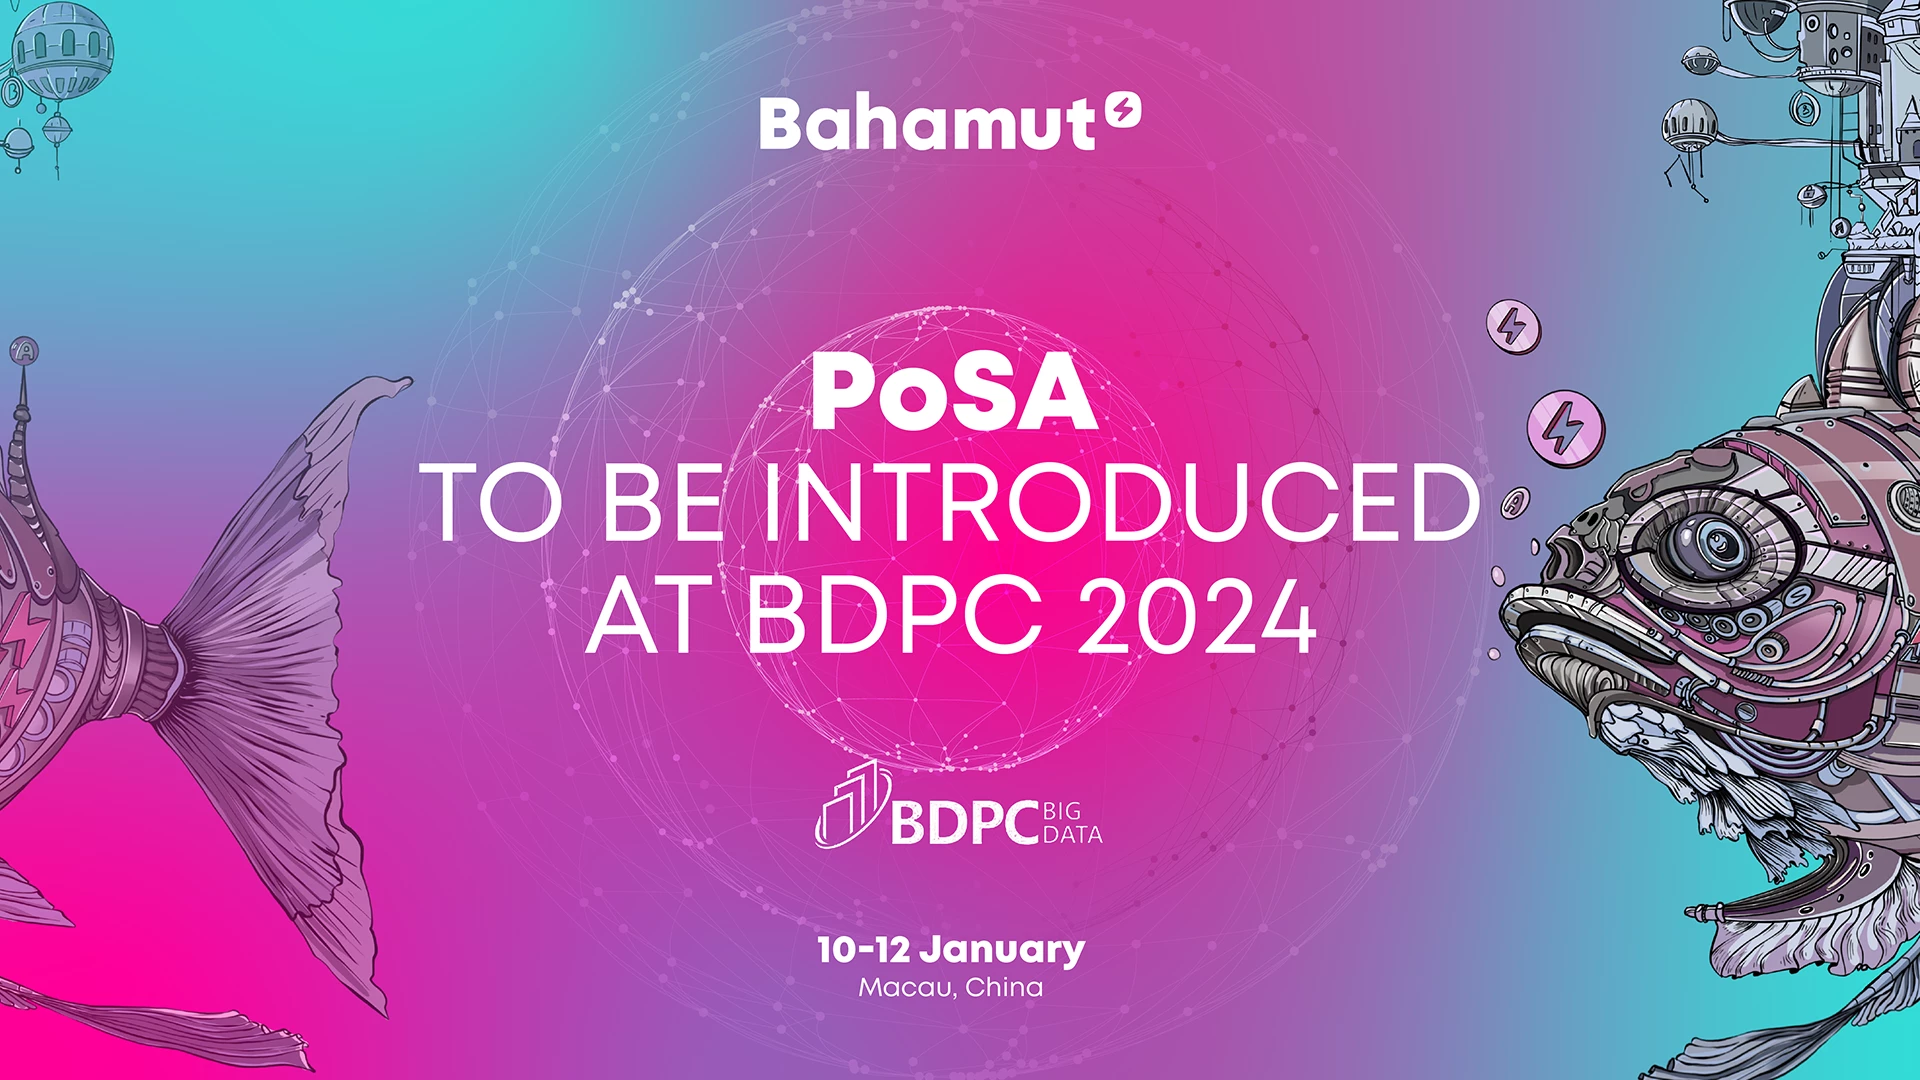 Bahamut's PoSA to Be Featured at BDPC 2024